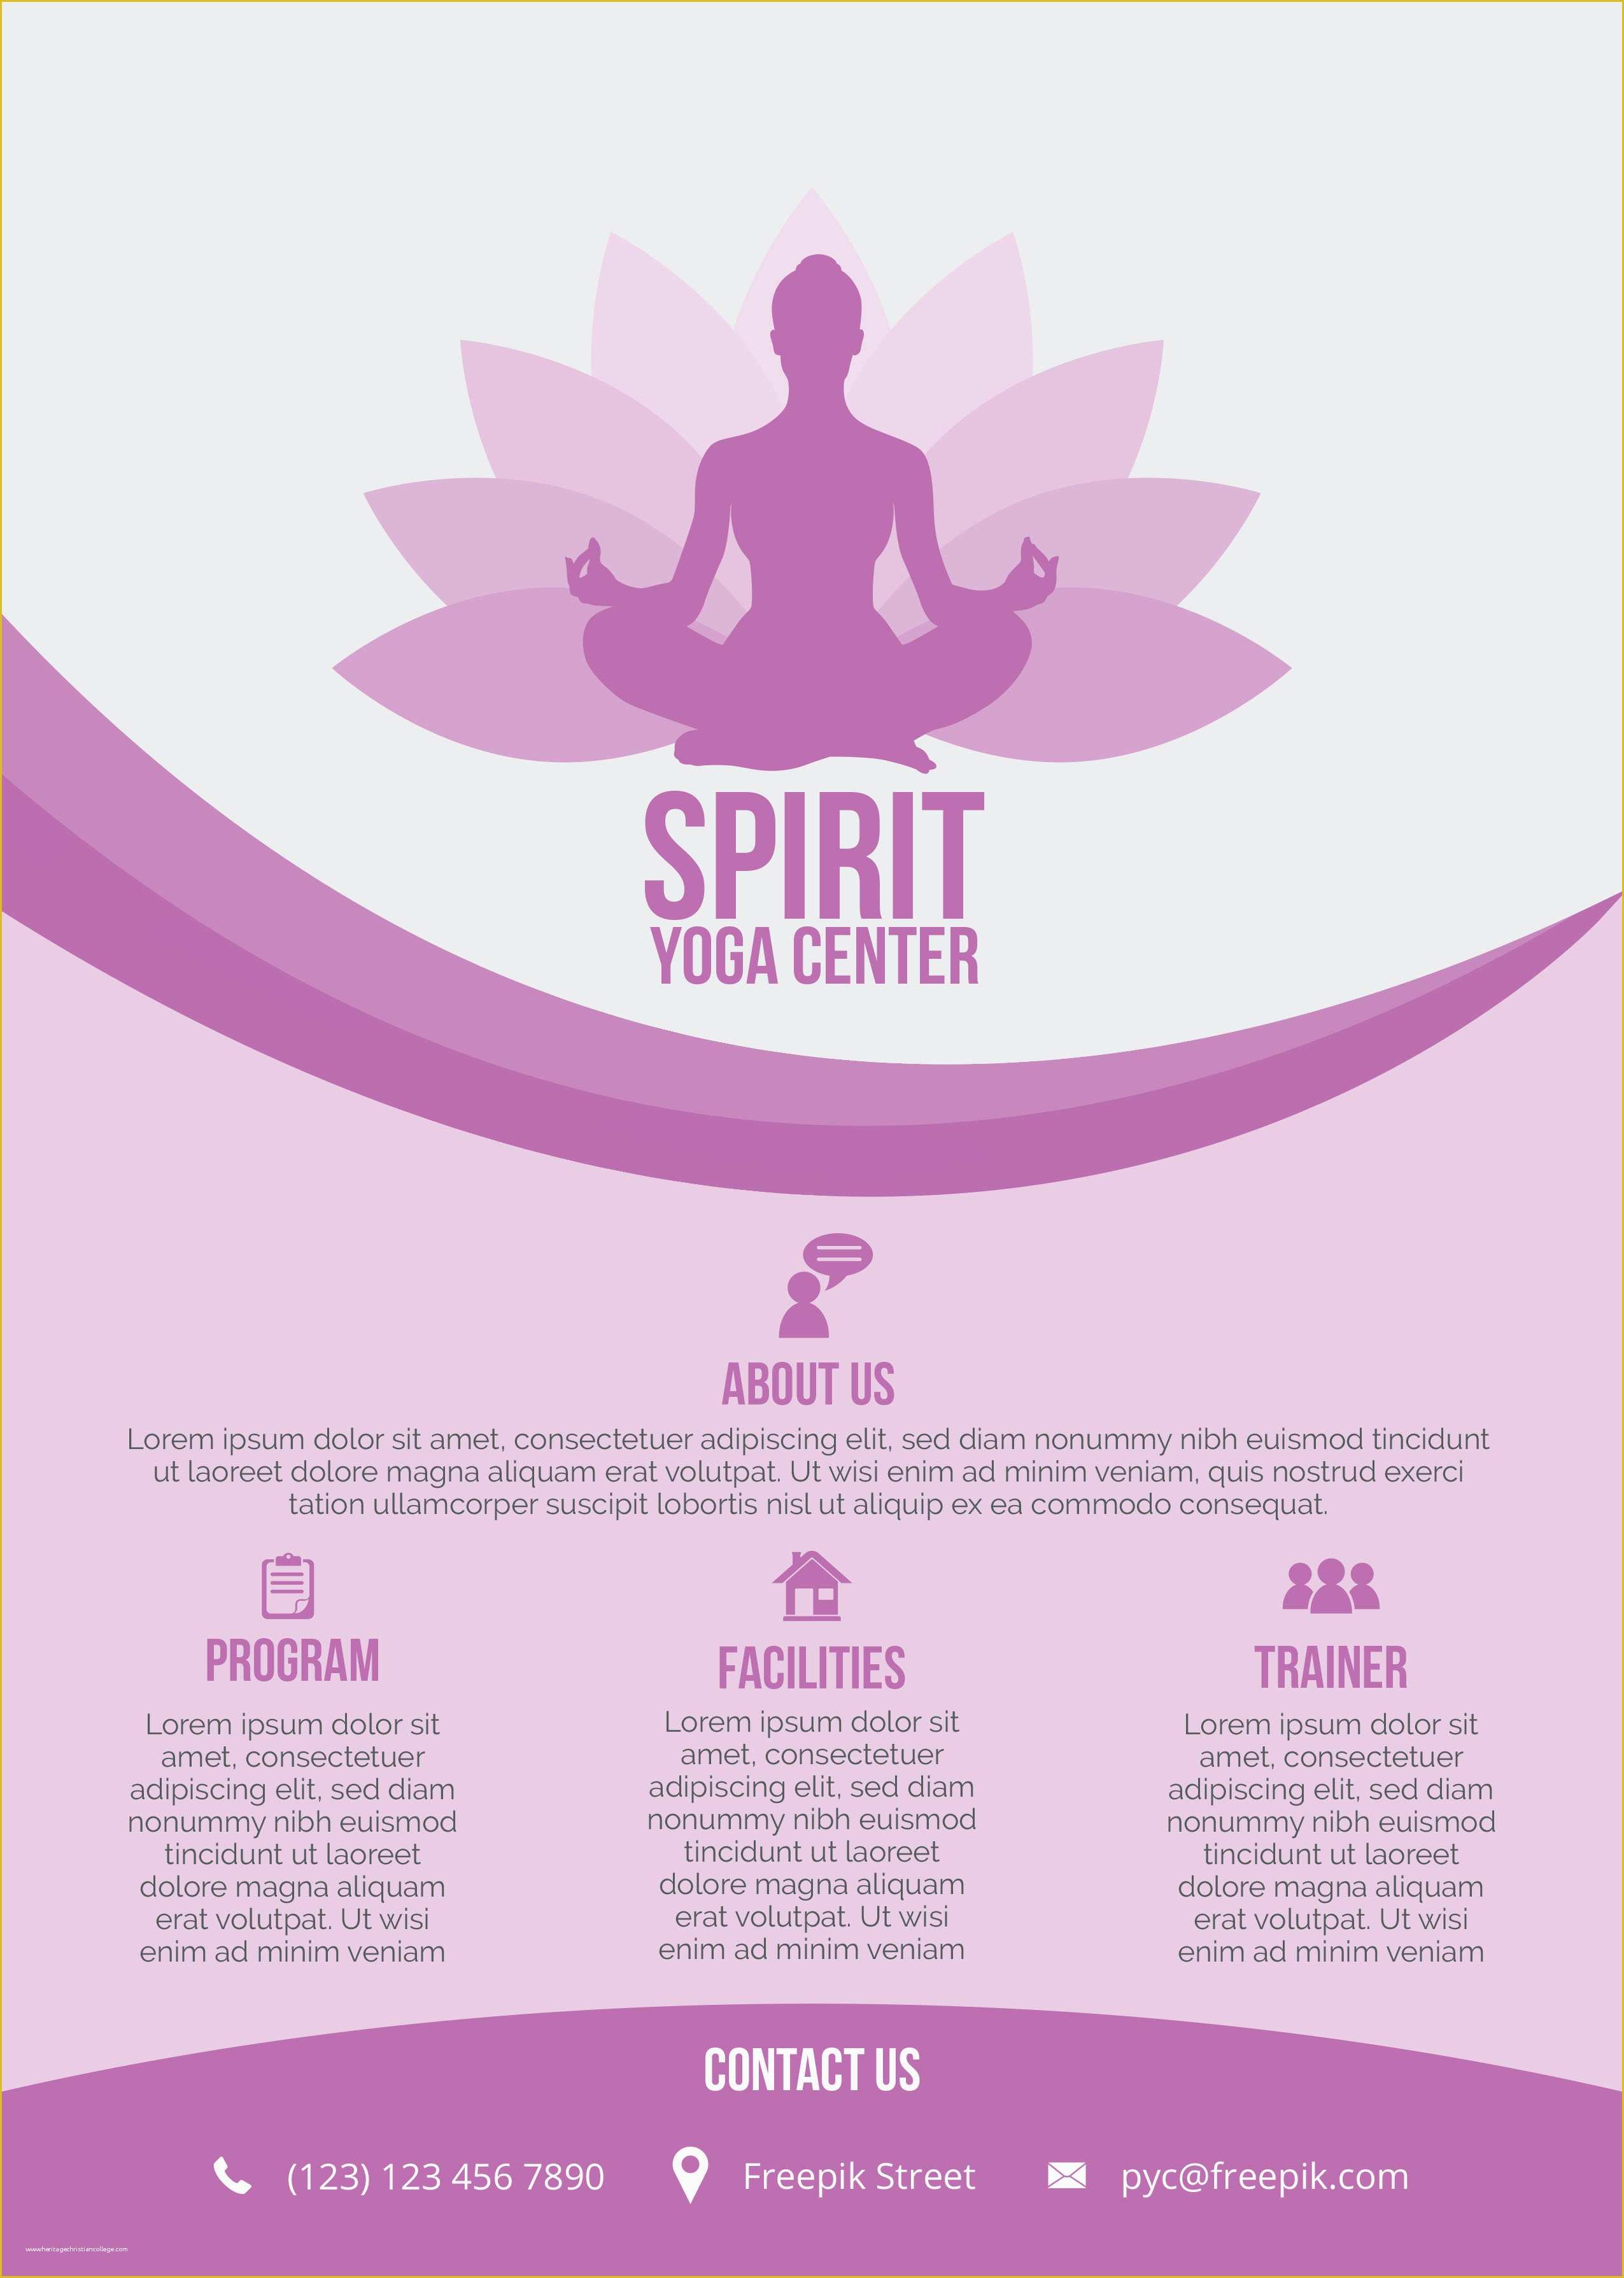 Free Handout Templates Of 20 Distinctive Yoga Flyer Templates Free for Professionals